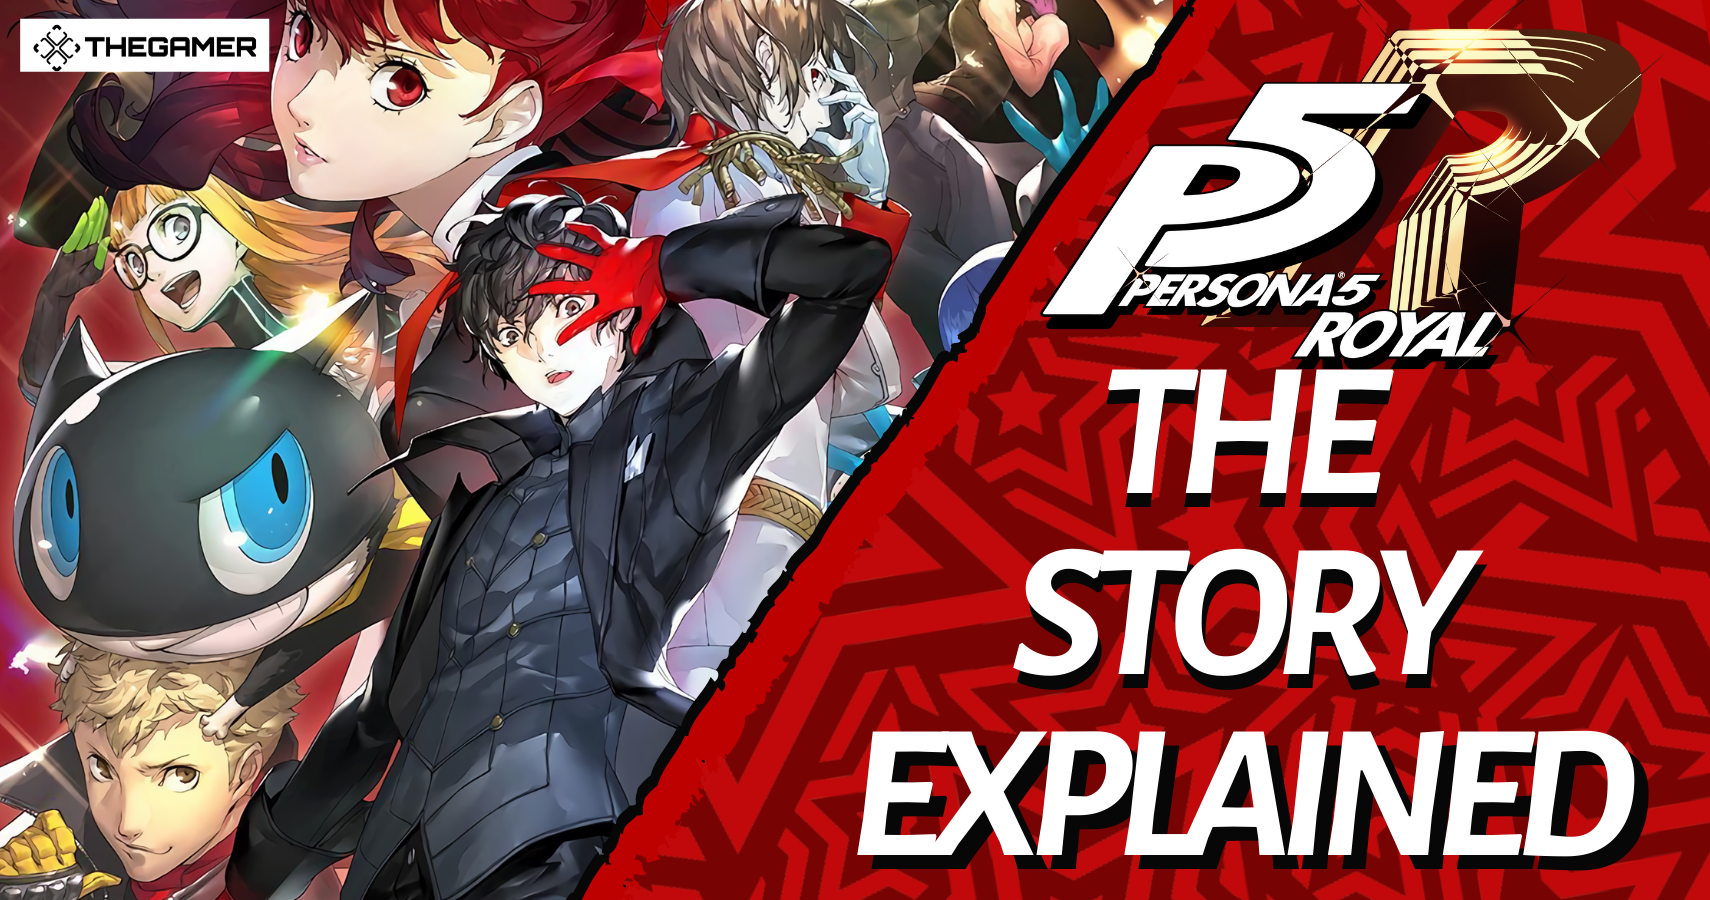 Every Persona 5 Game, Explained